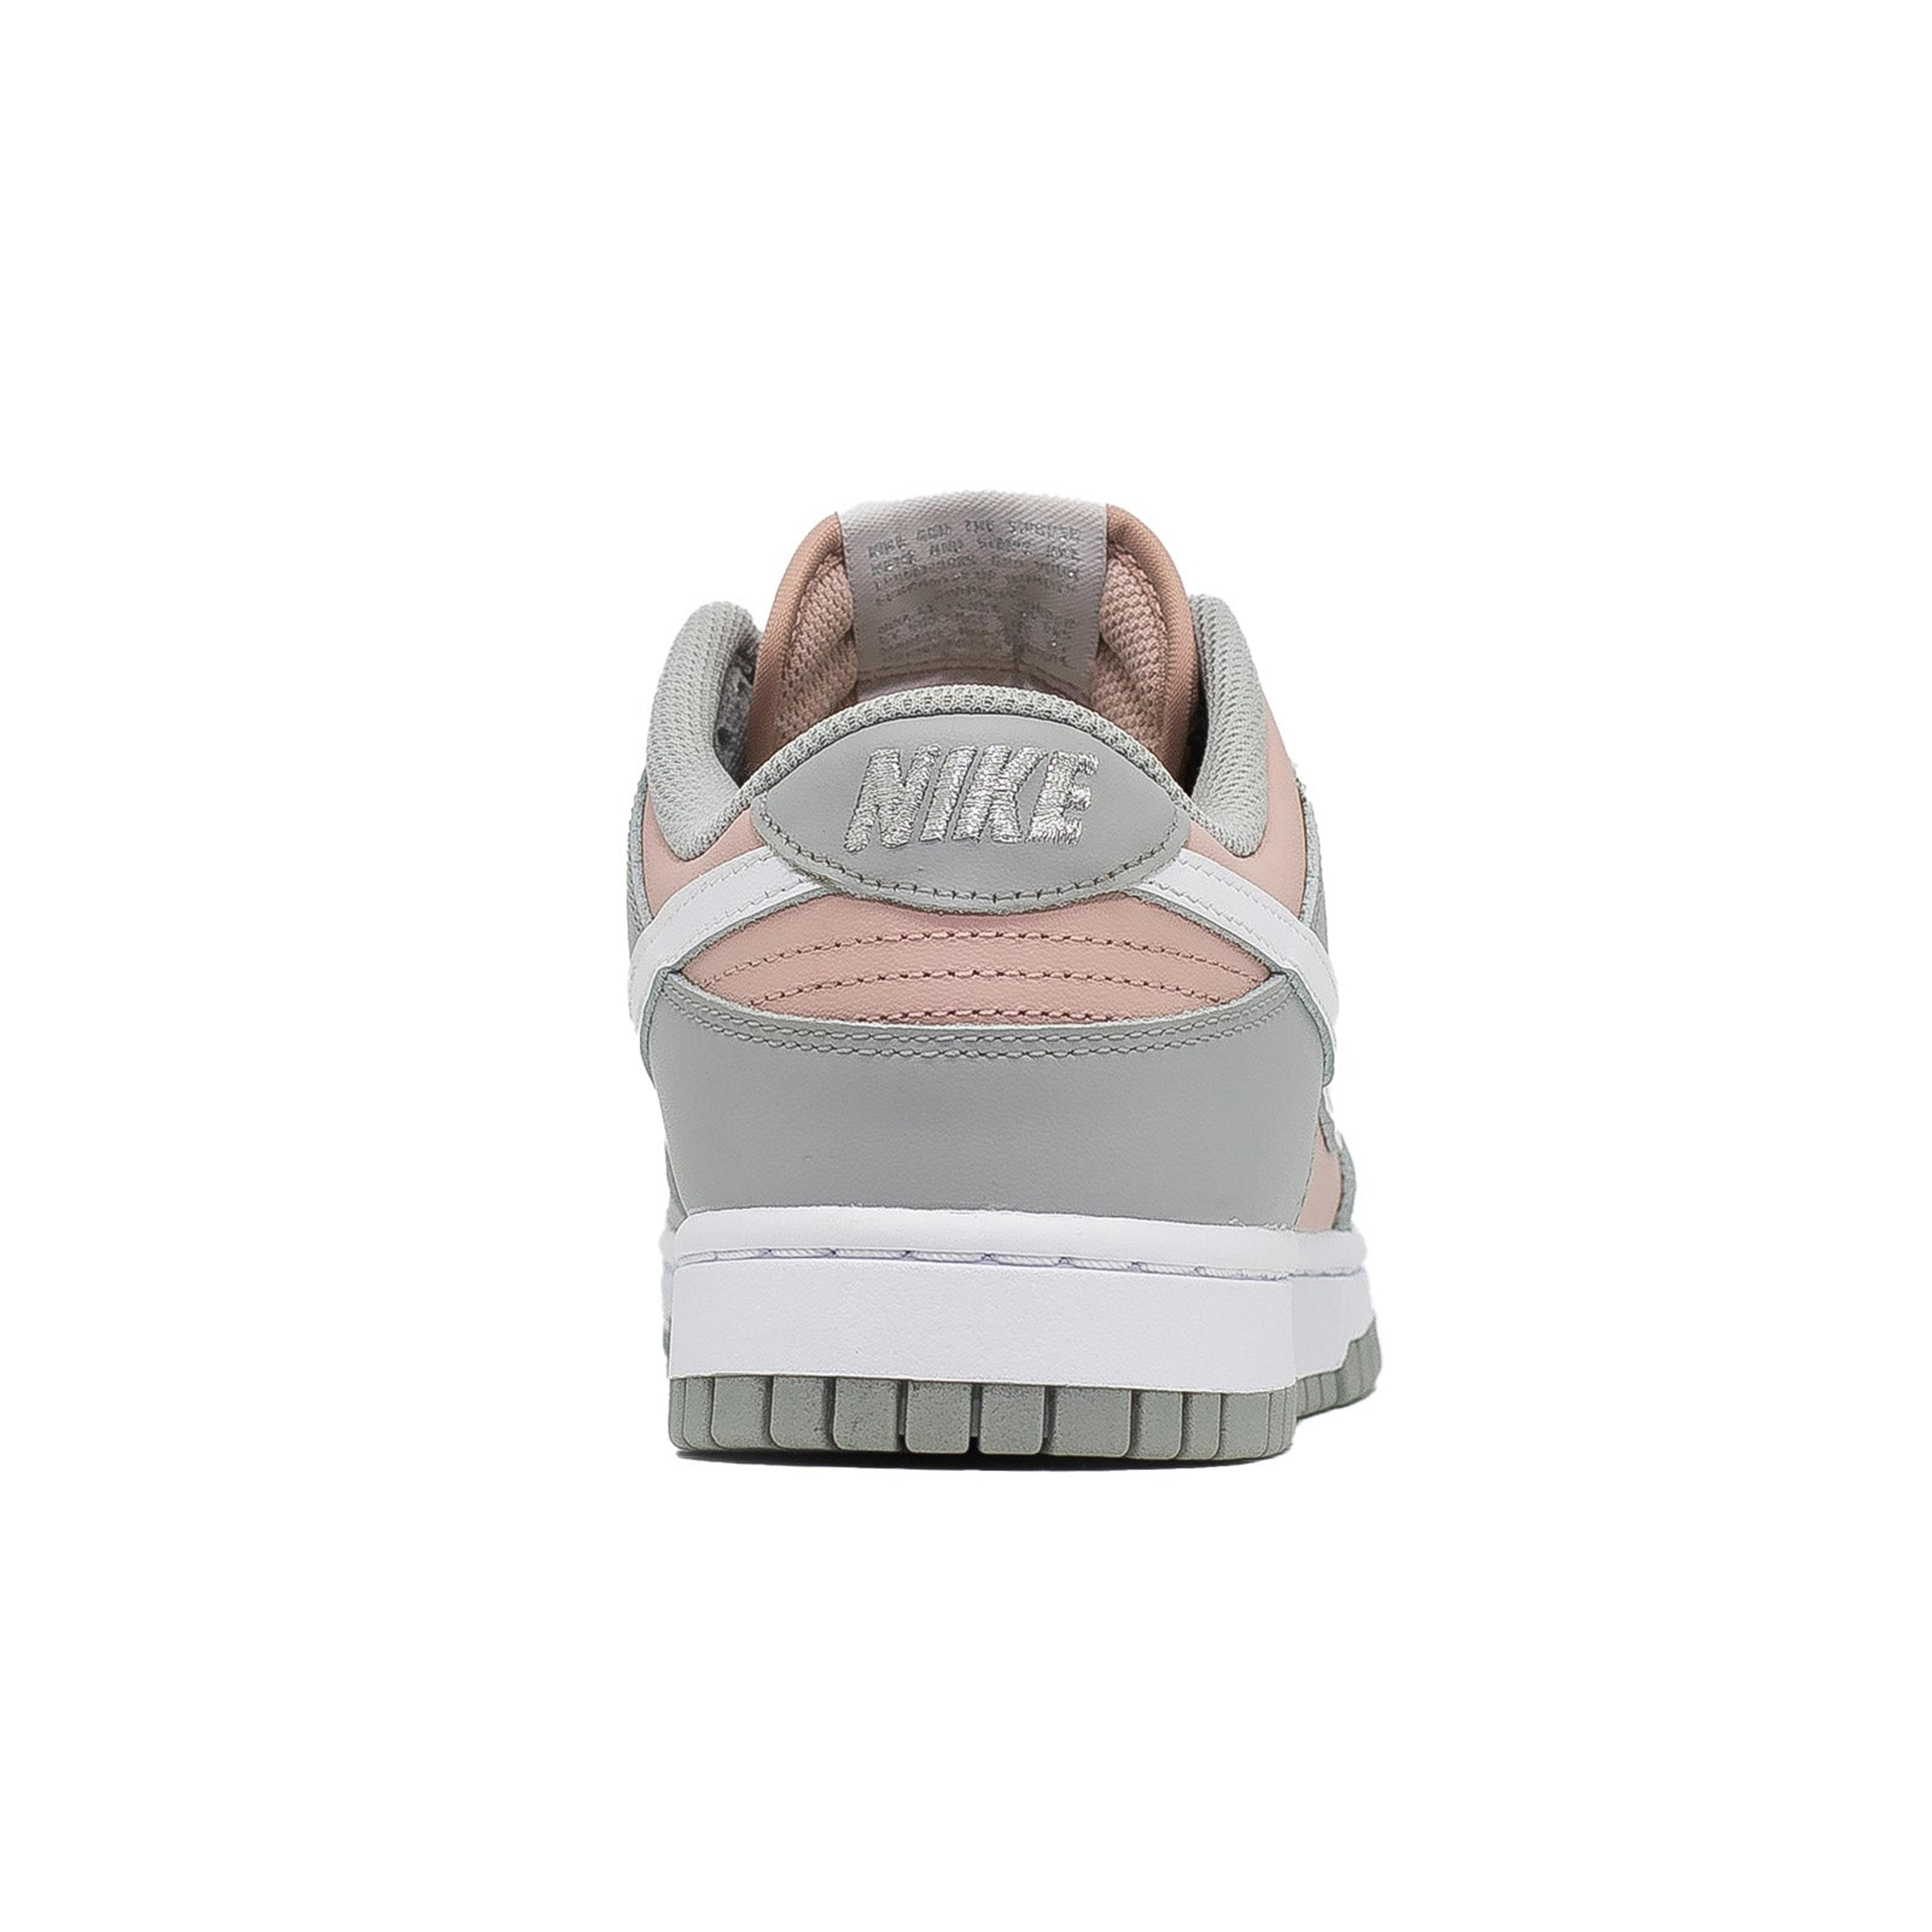 Alternate View 3 of Women's Nike Dunk Low, Pink Oxford